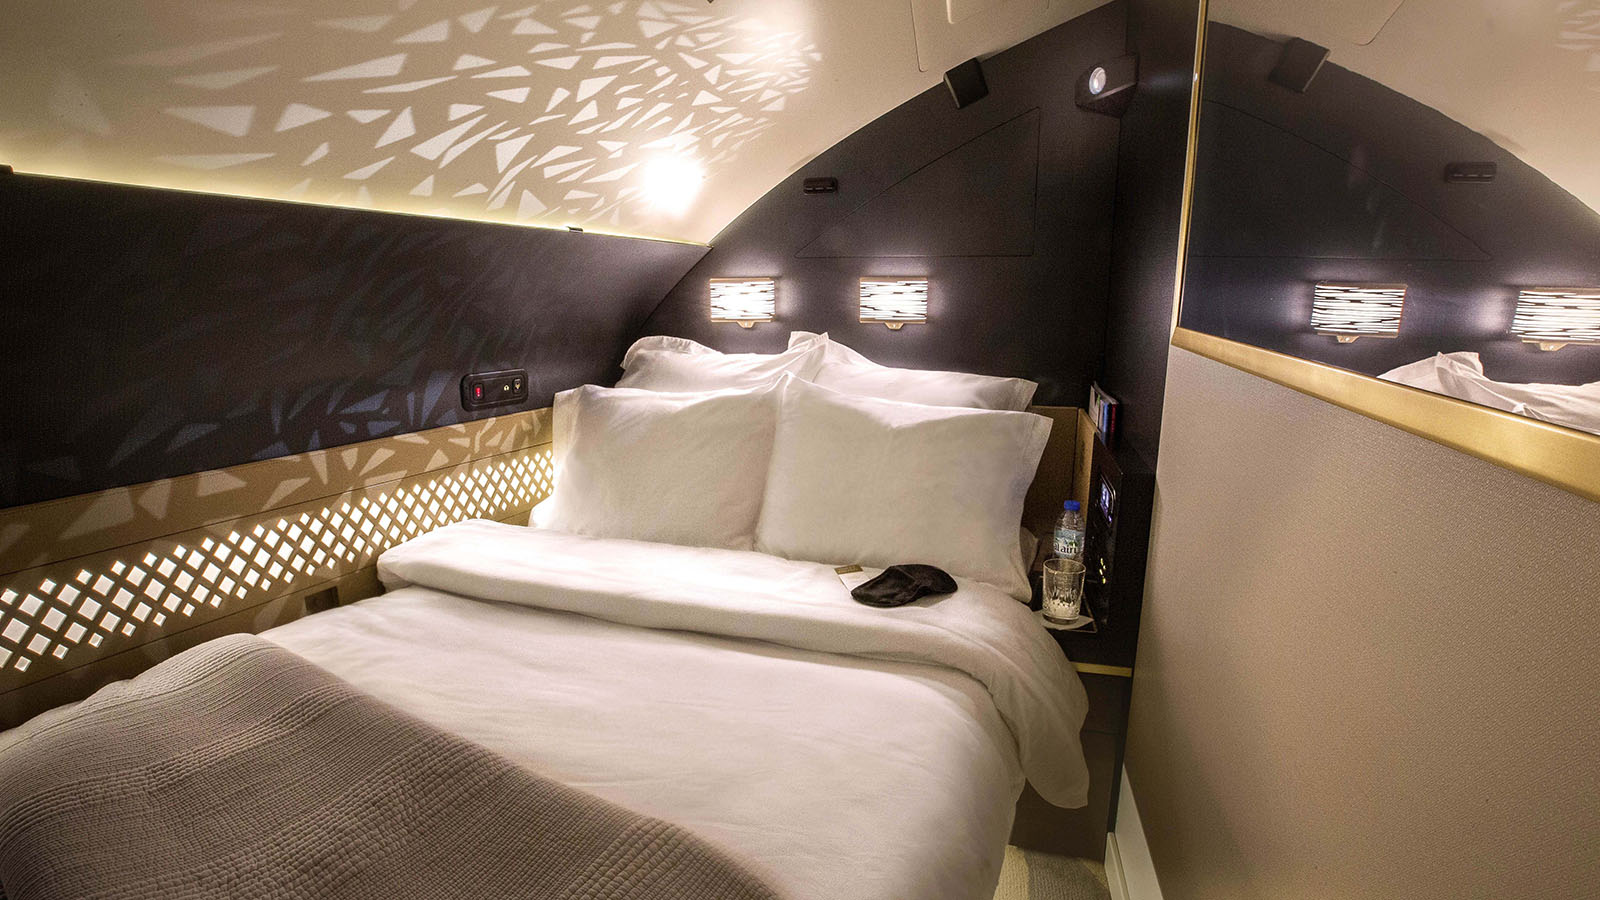 The bedroom in The Residence on Etihad's Airbus A380